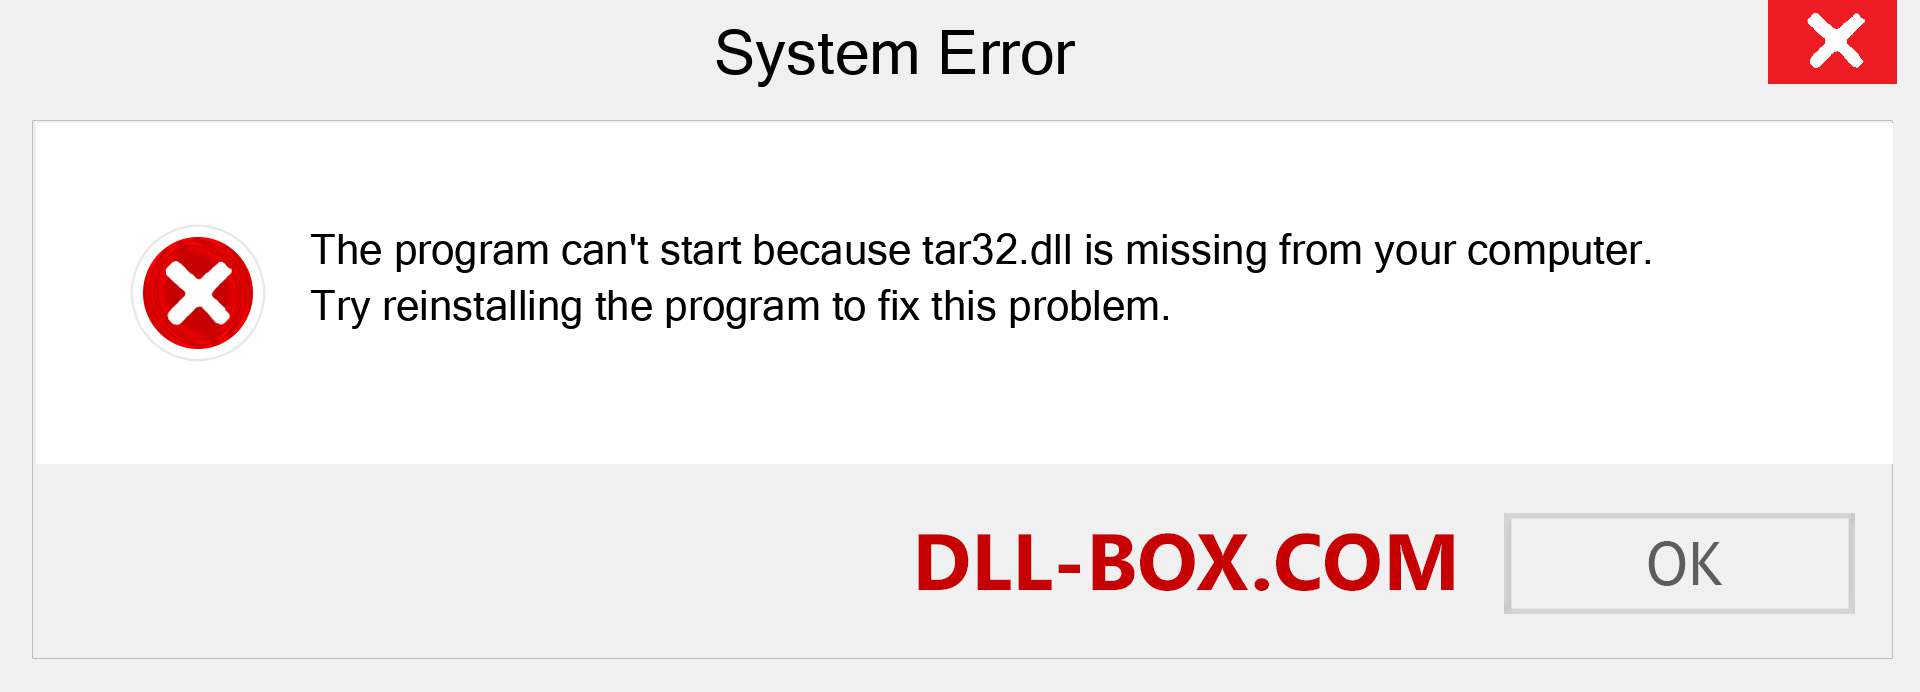  tar32.dll file is missing?. Download for Windows 7, 8, 10 - Fix  tar32 dll Missing Error on Windows, photos, images